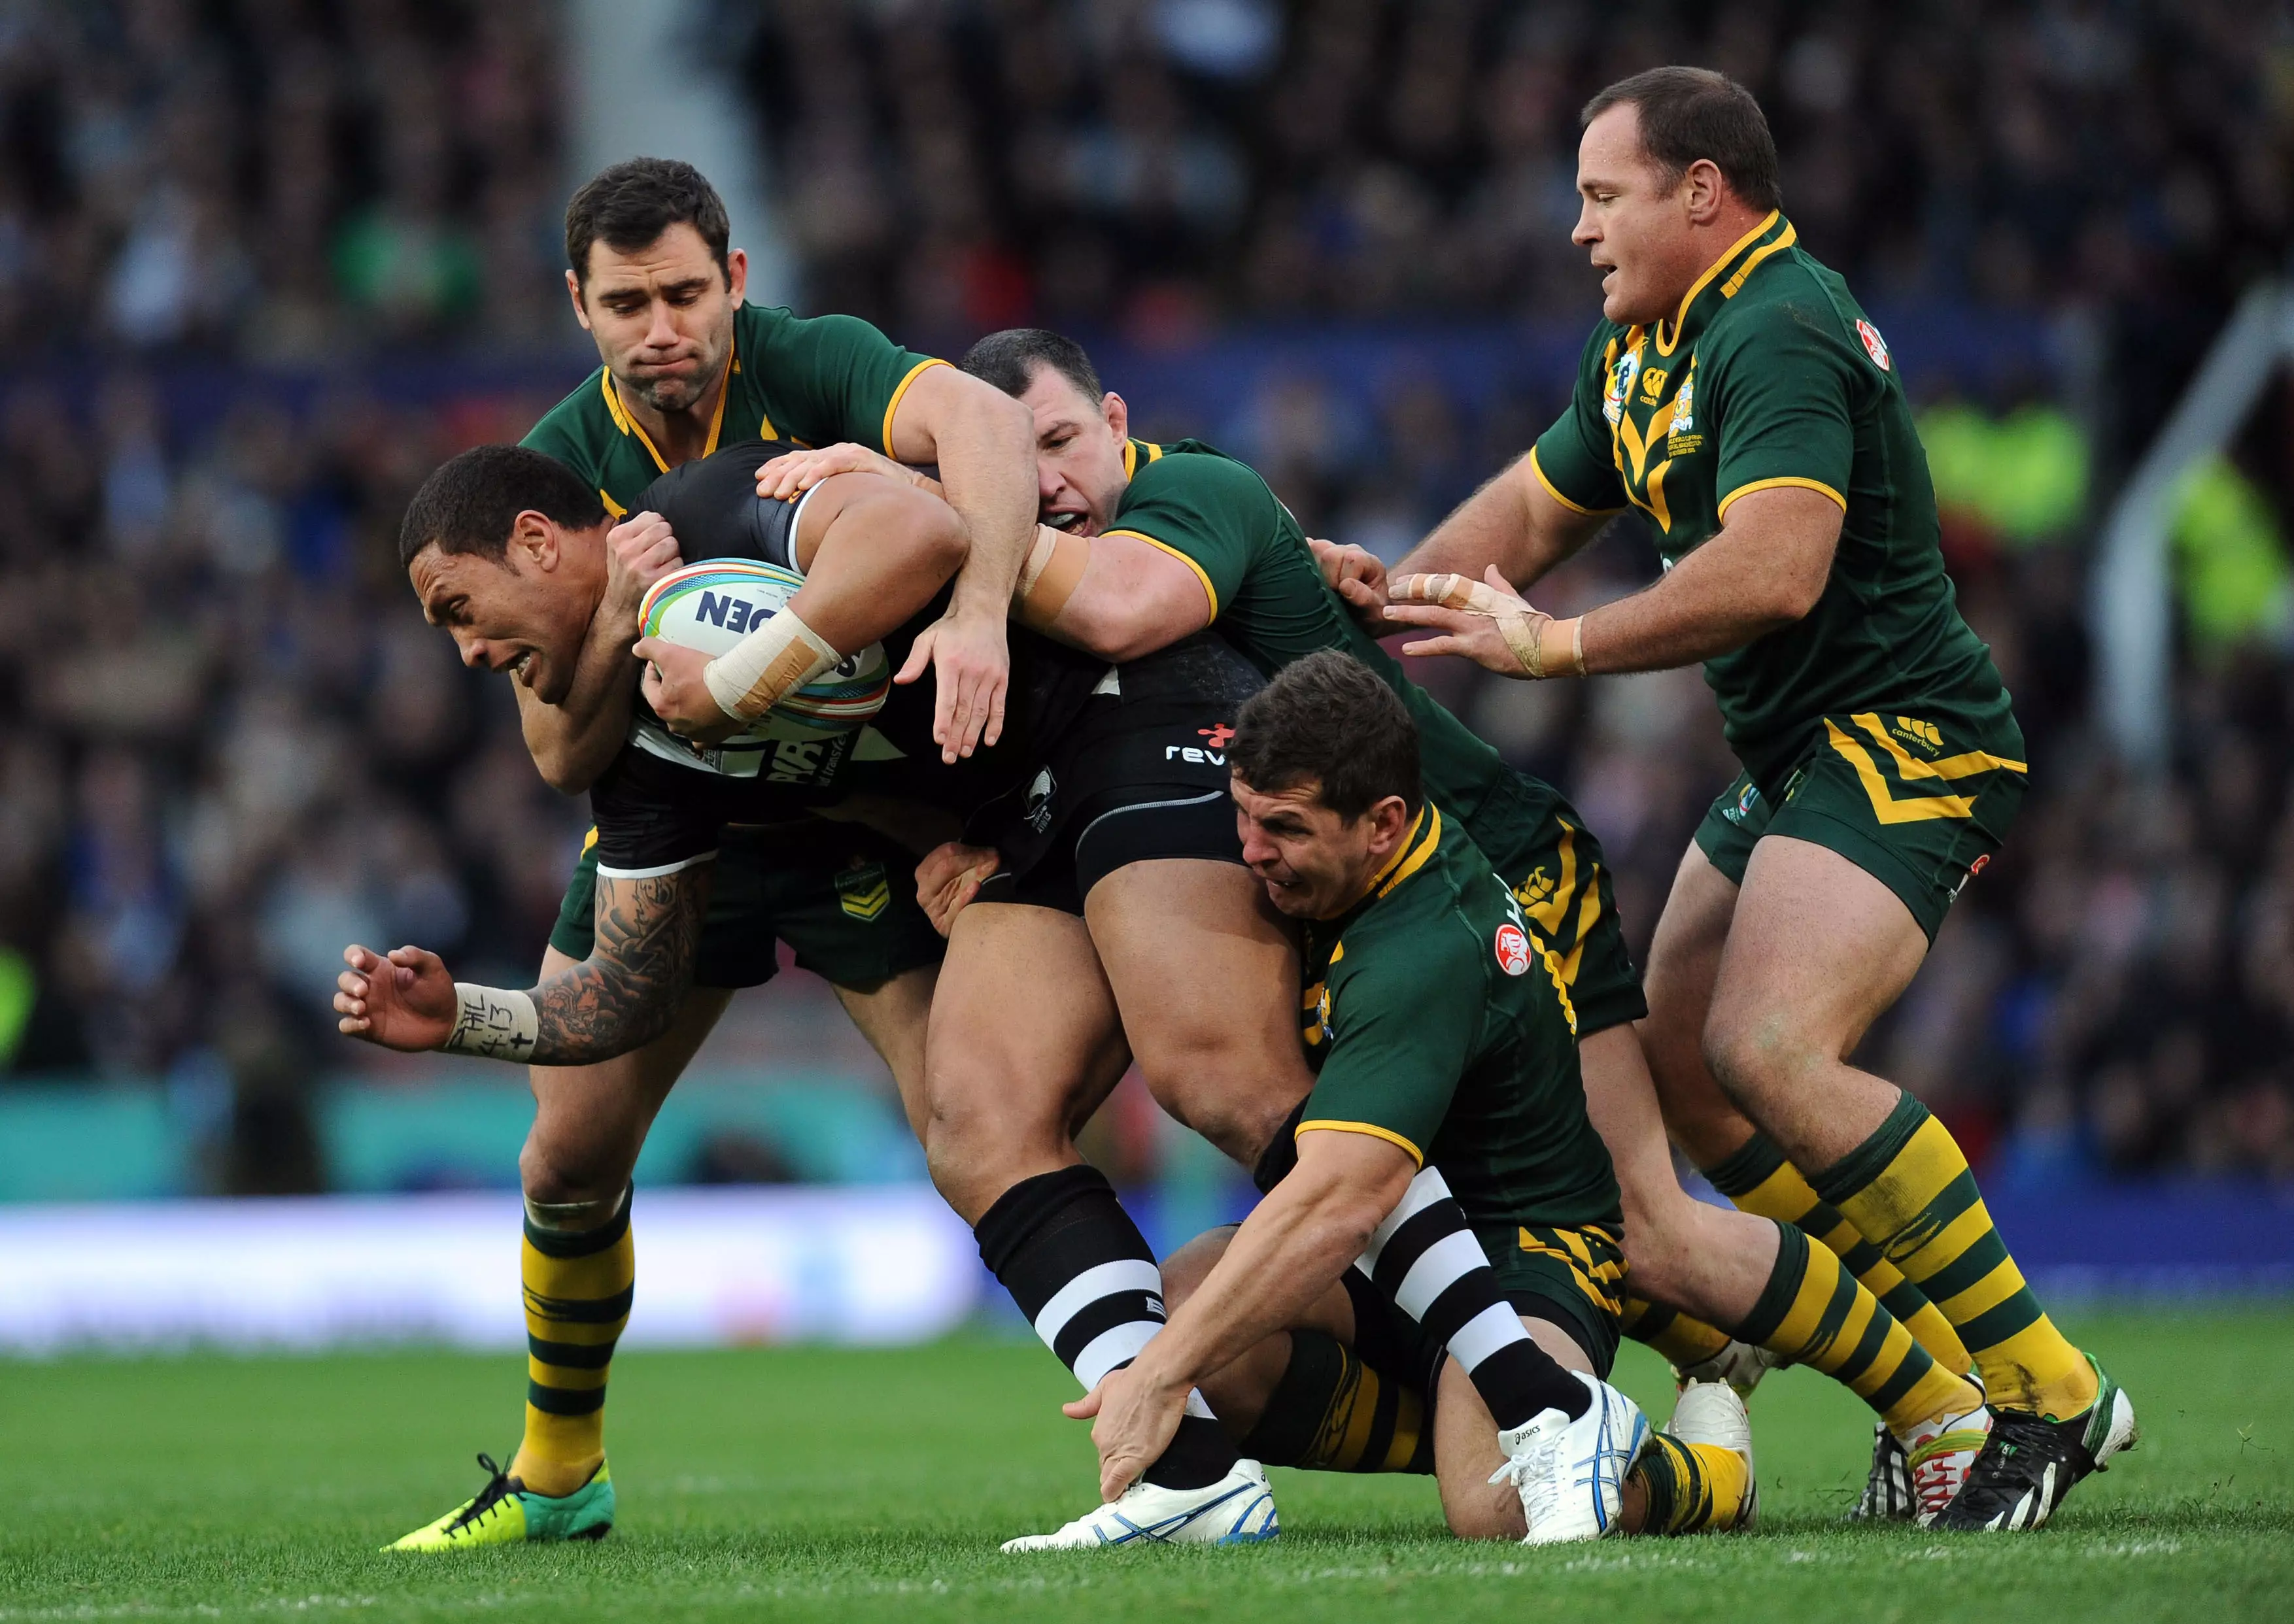 Vatuvei is tackled during New Zealand's match against Australia back in 2013.